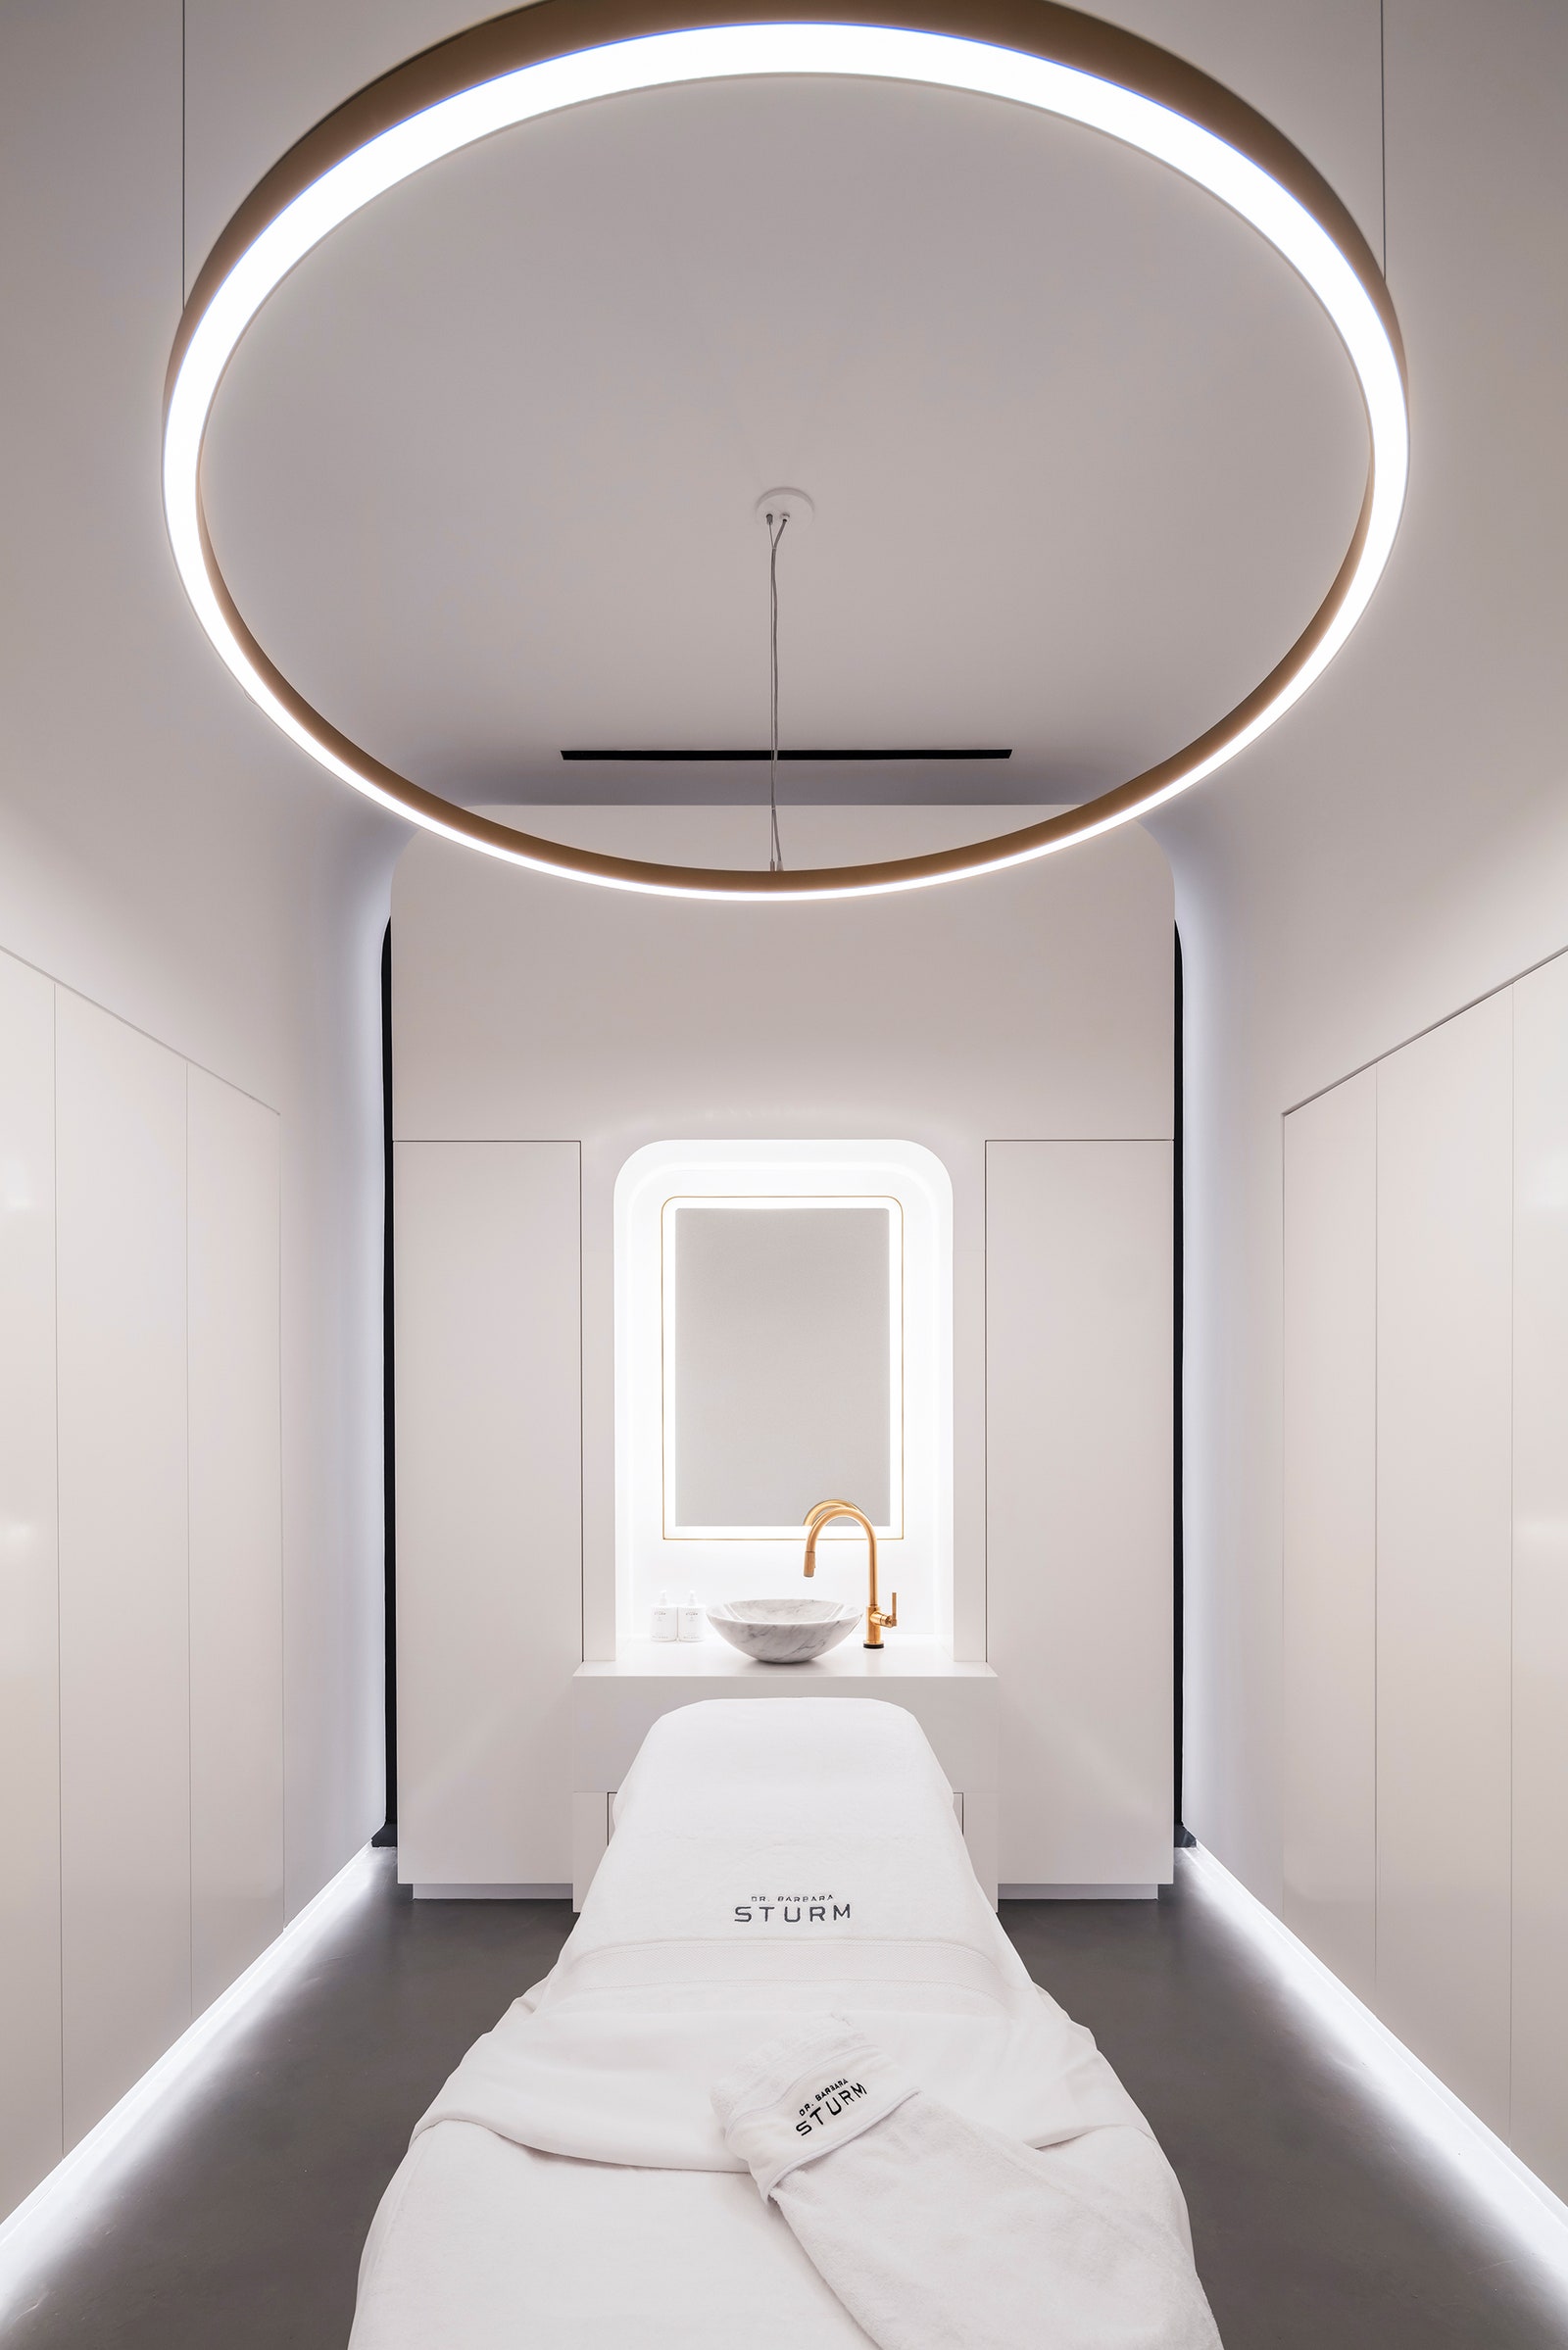 pA floating light fixture hangs over one of three treatment beds. p 